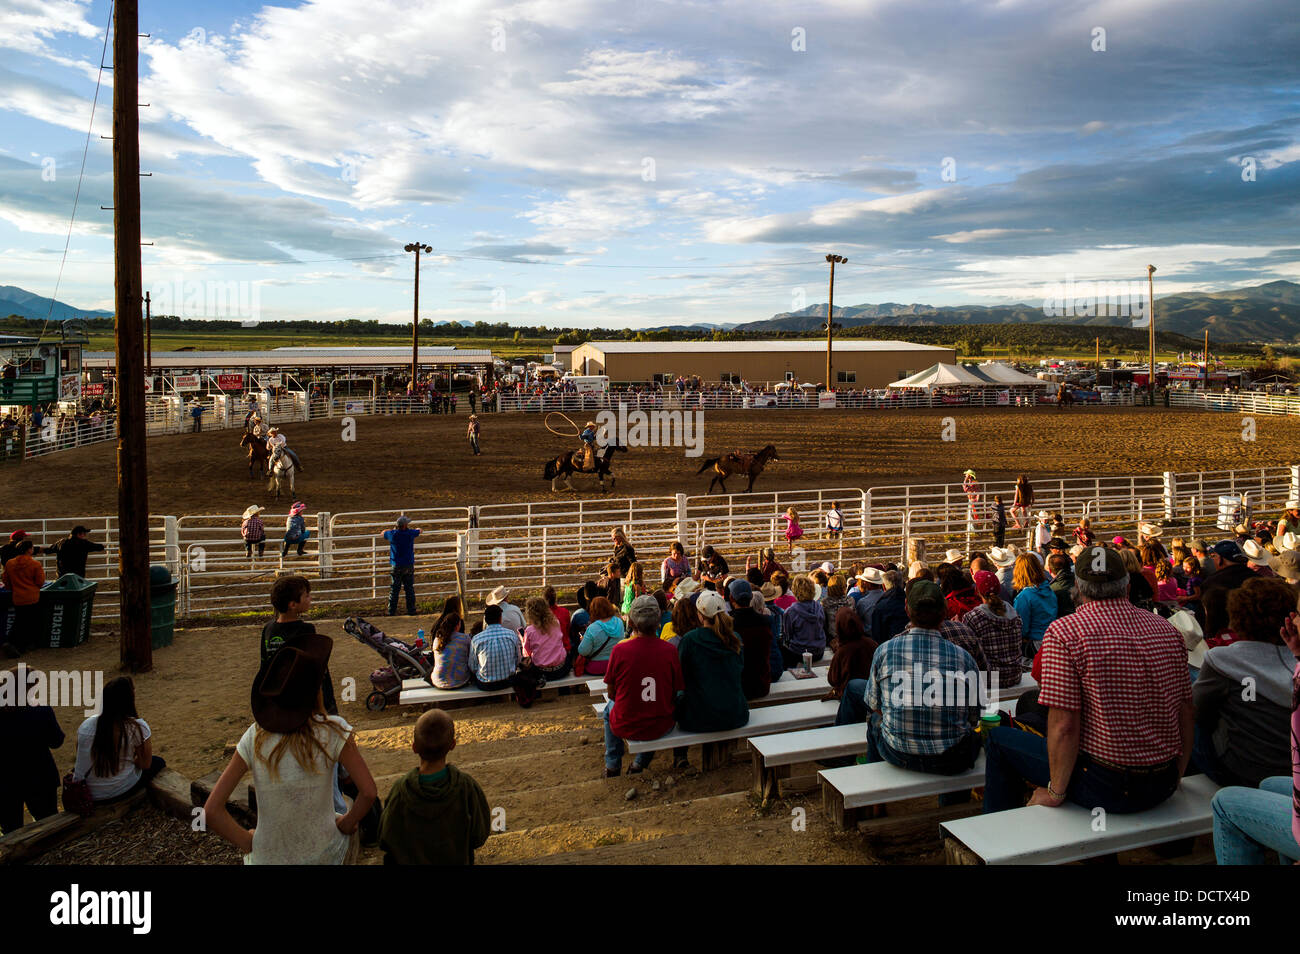 Spectators in bleachers watch the Chaffee County Fair & Rodeo Stock Photo